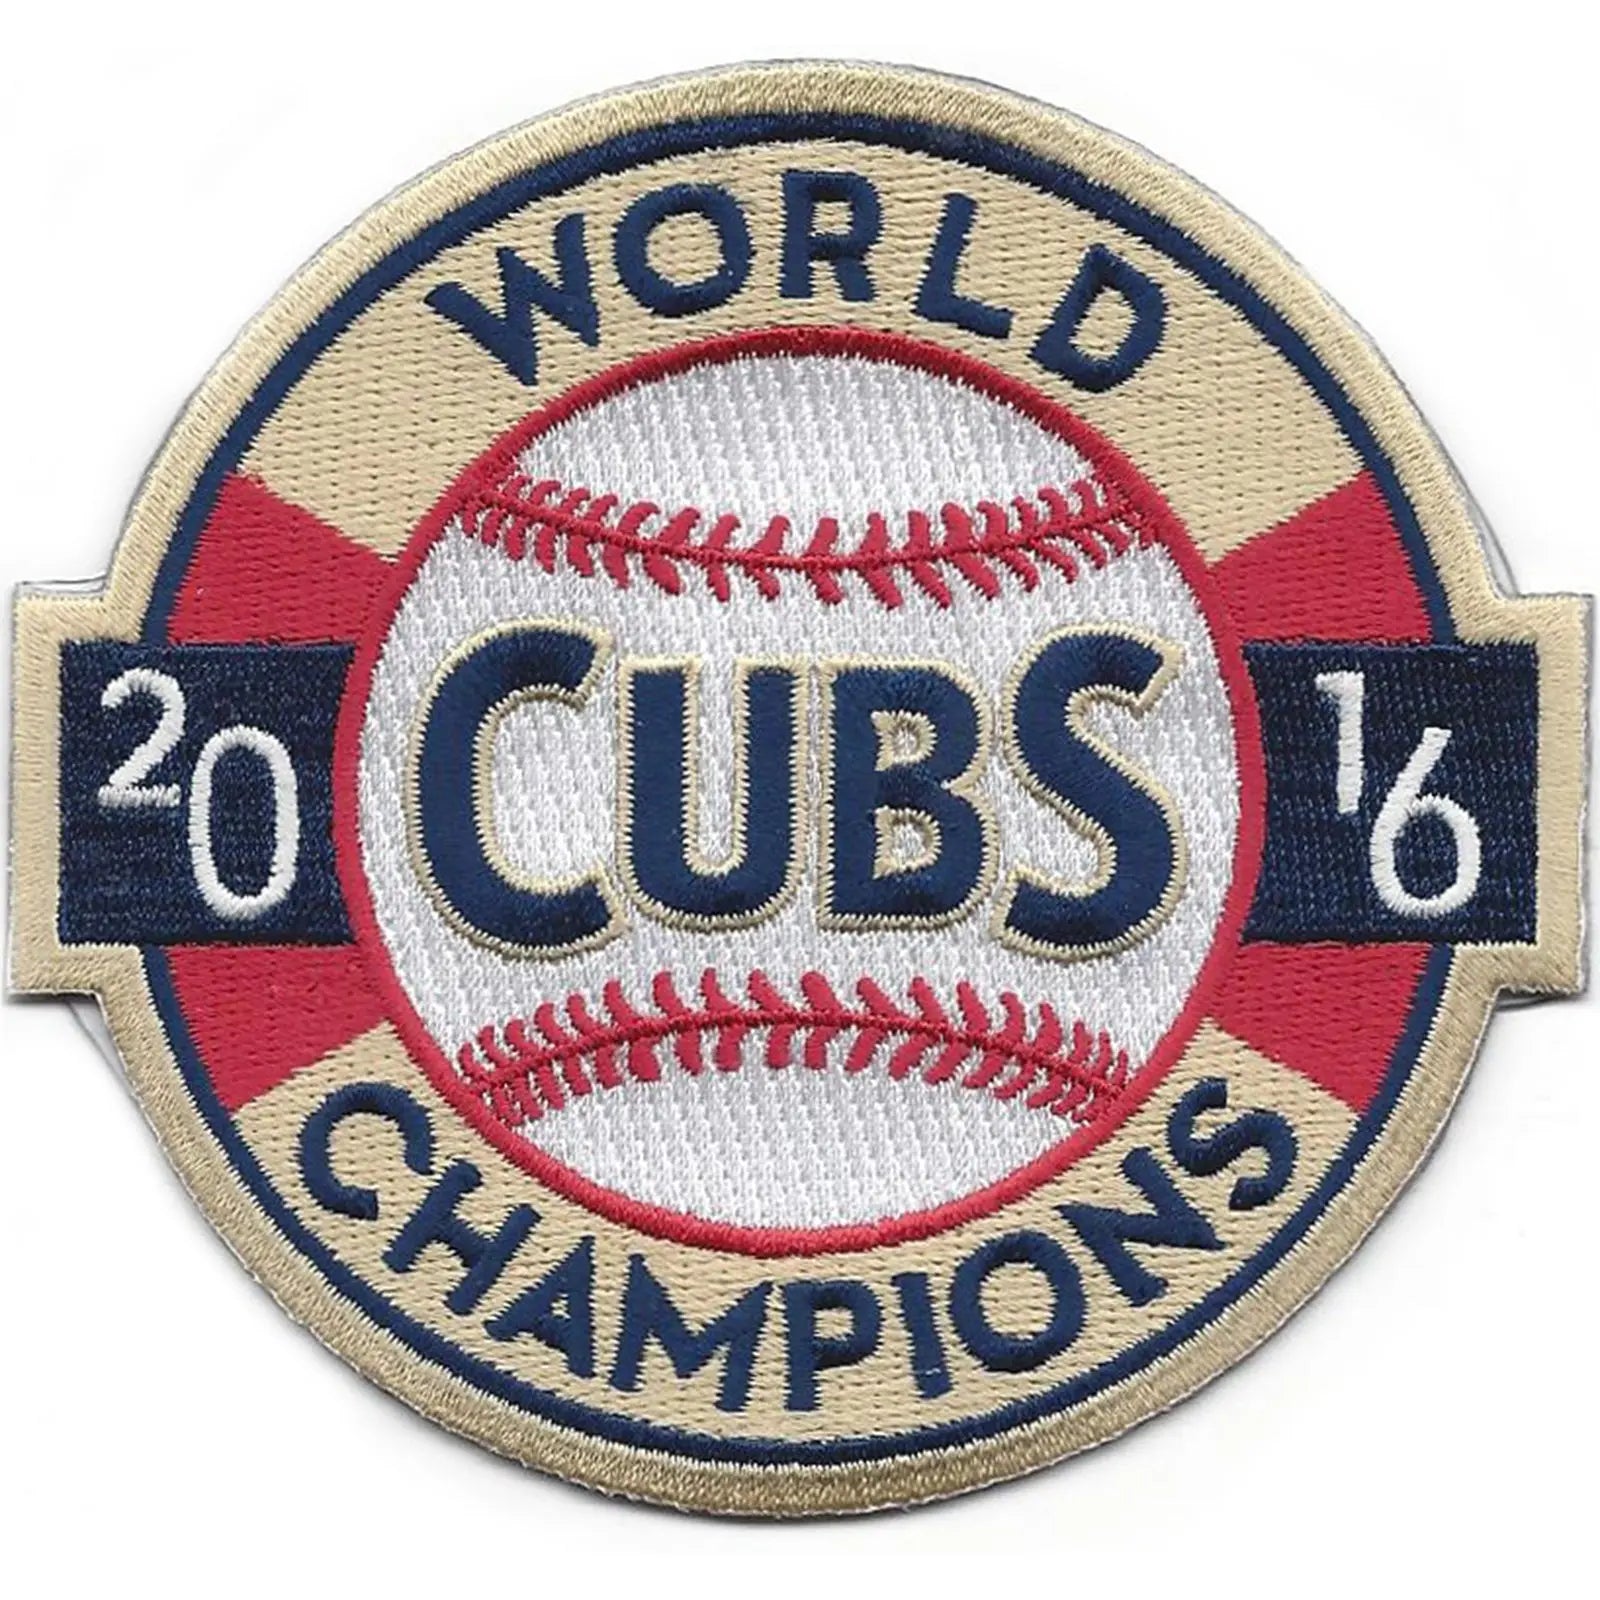 chicago cubs 2016 world series jersey